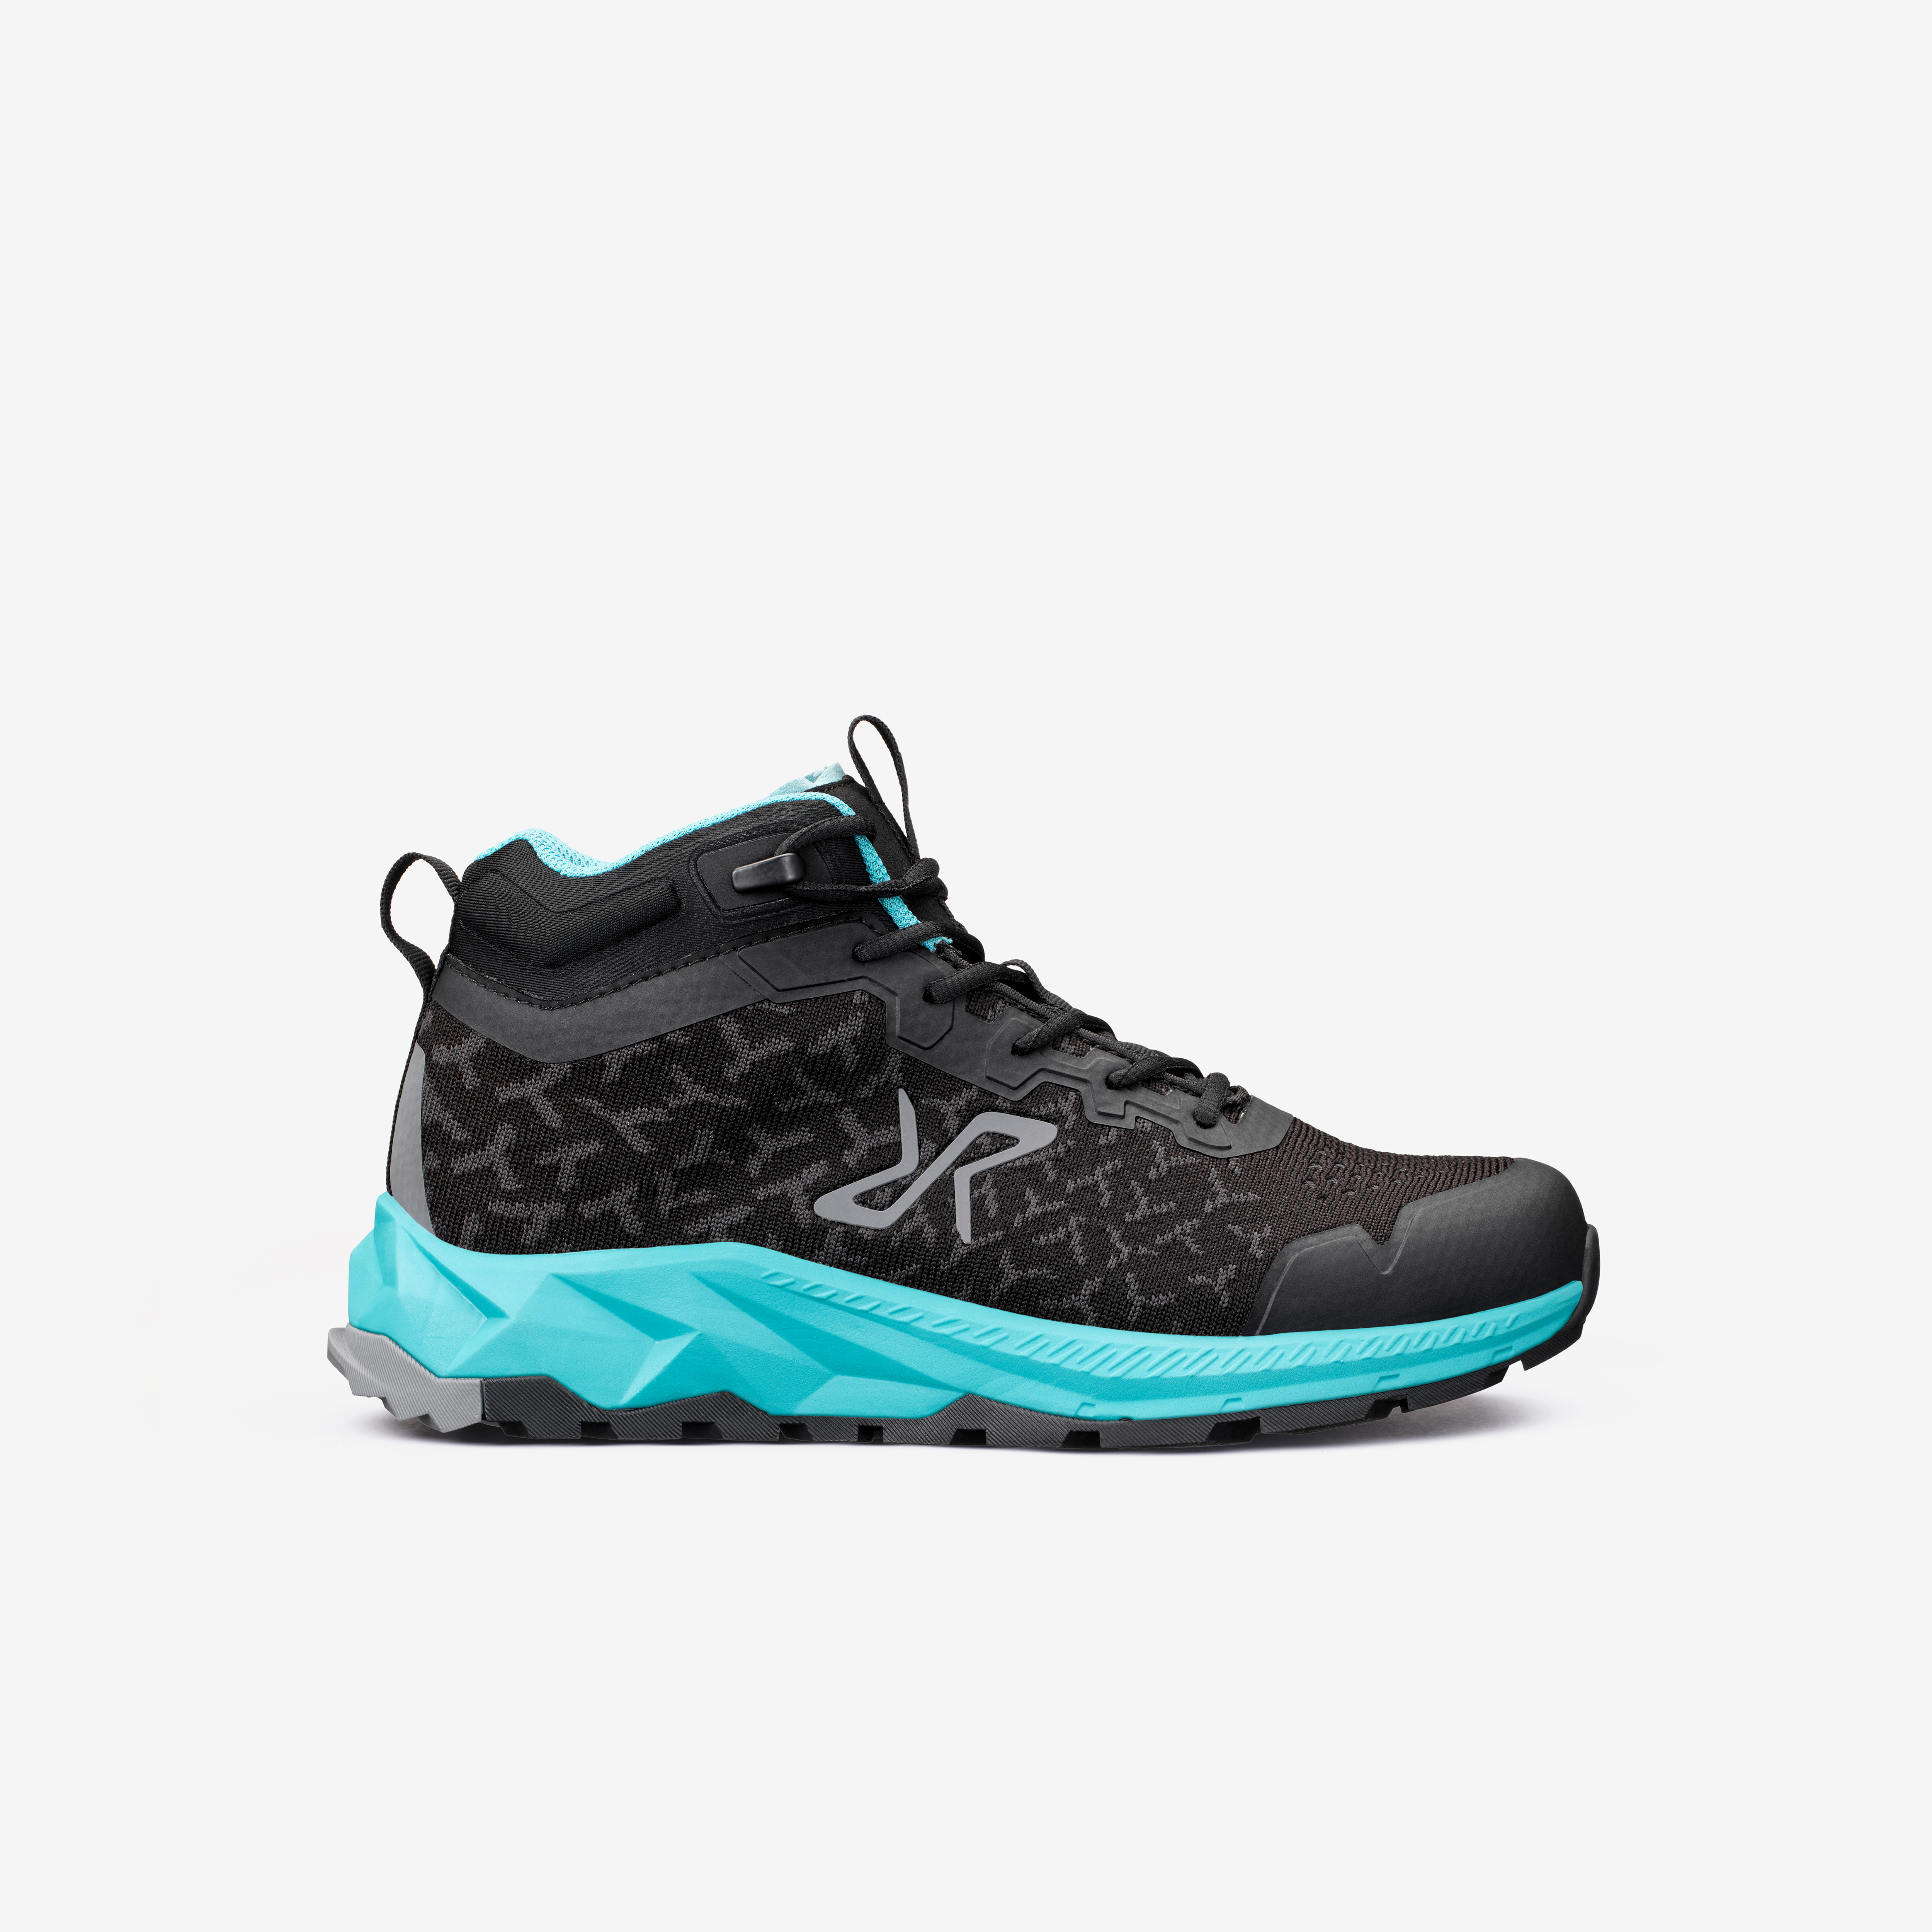 Trailknit Waterproof Mid Hiking Shoes Black/Turquoise Donna